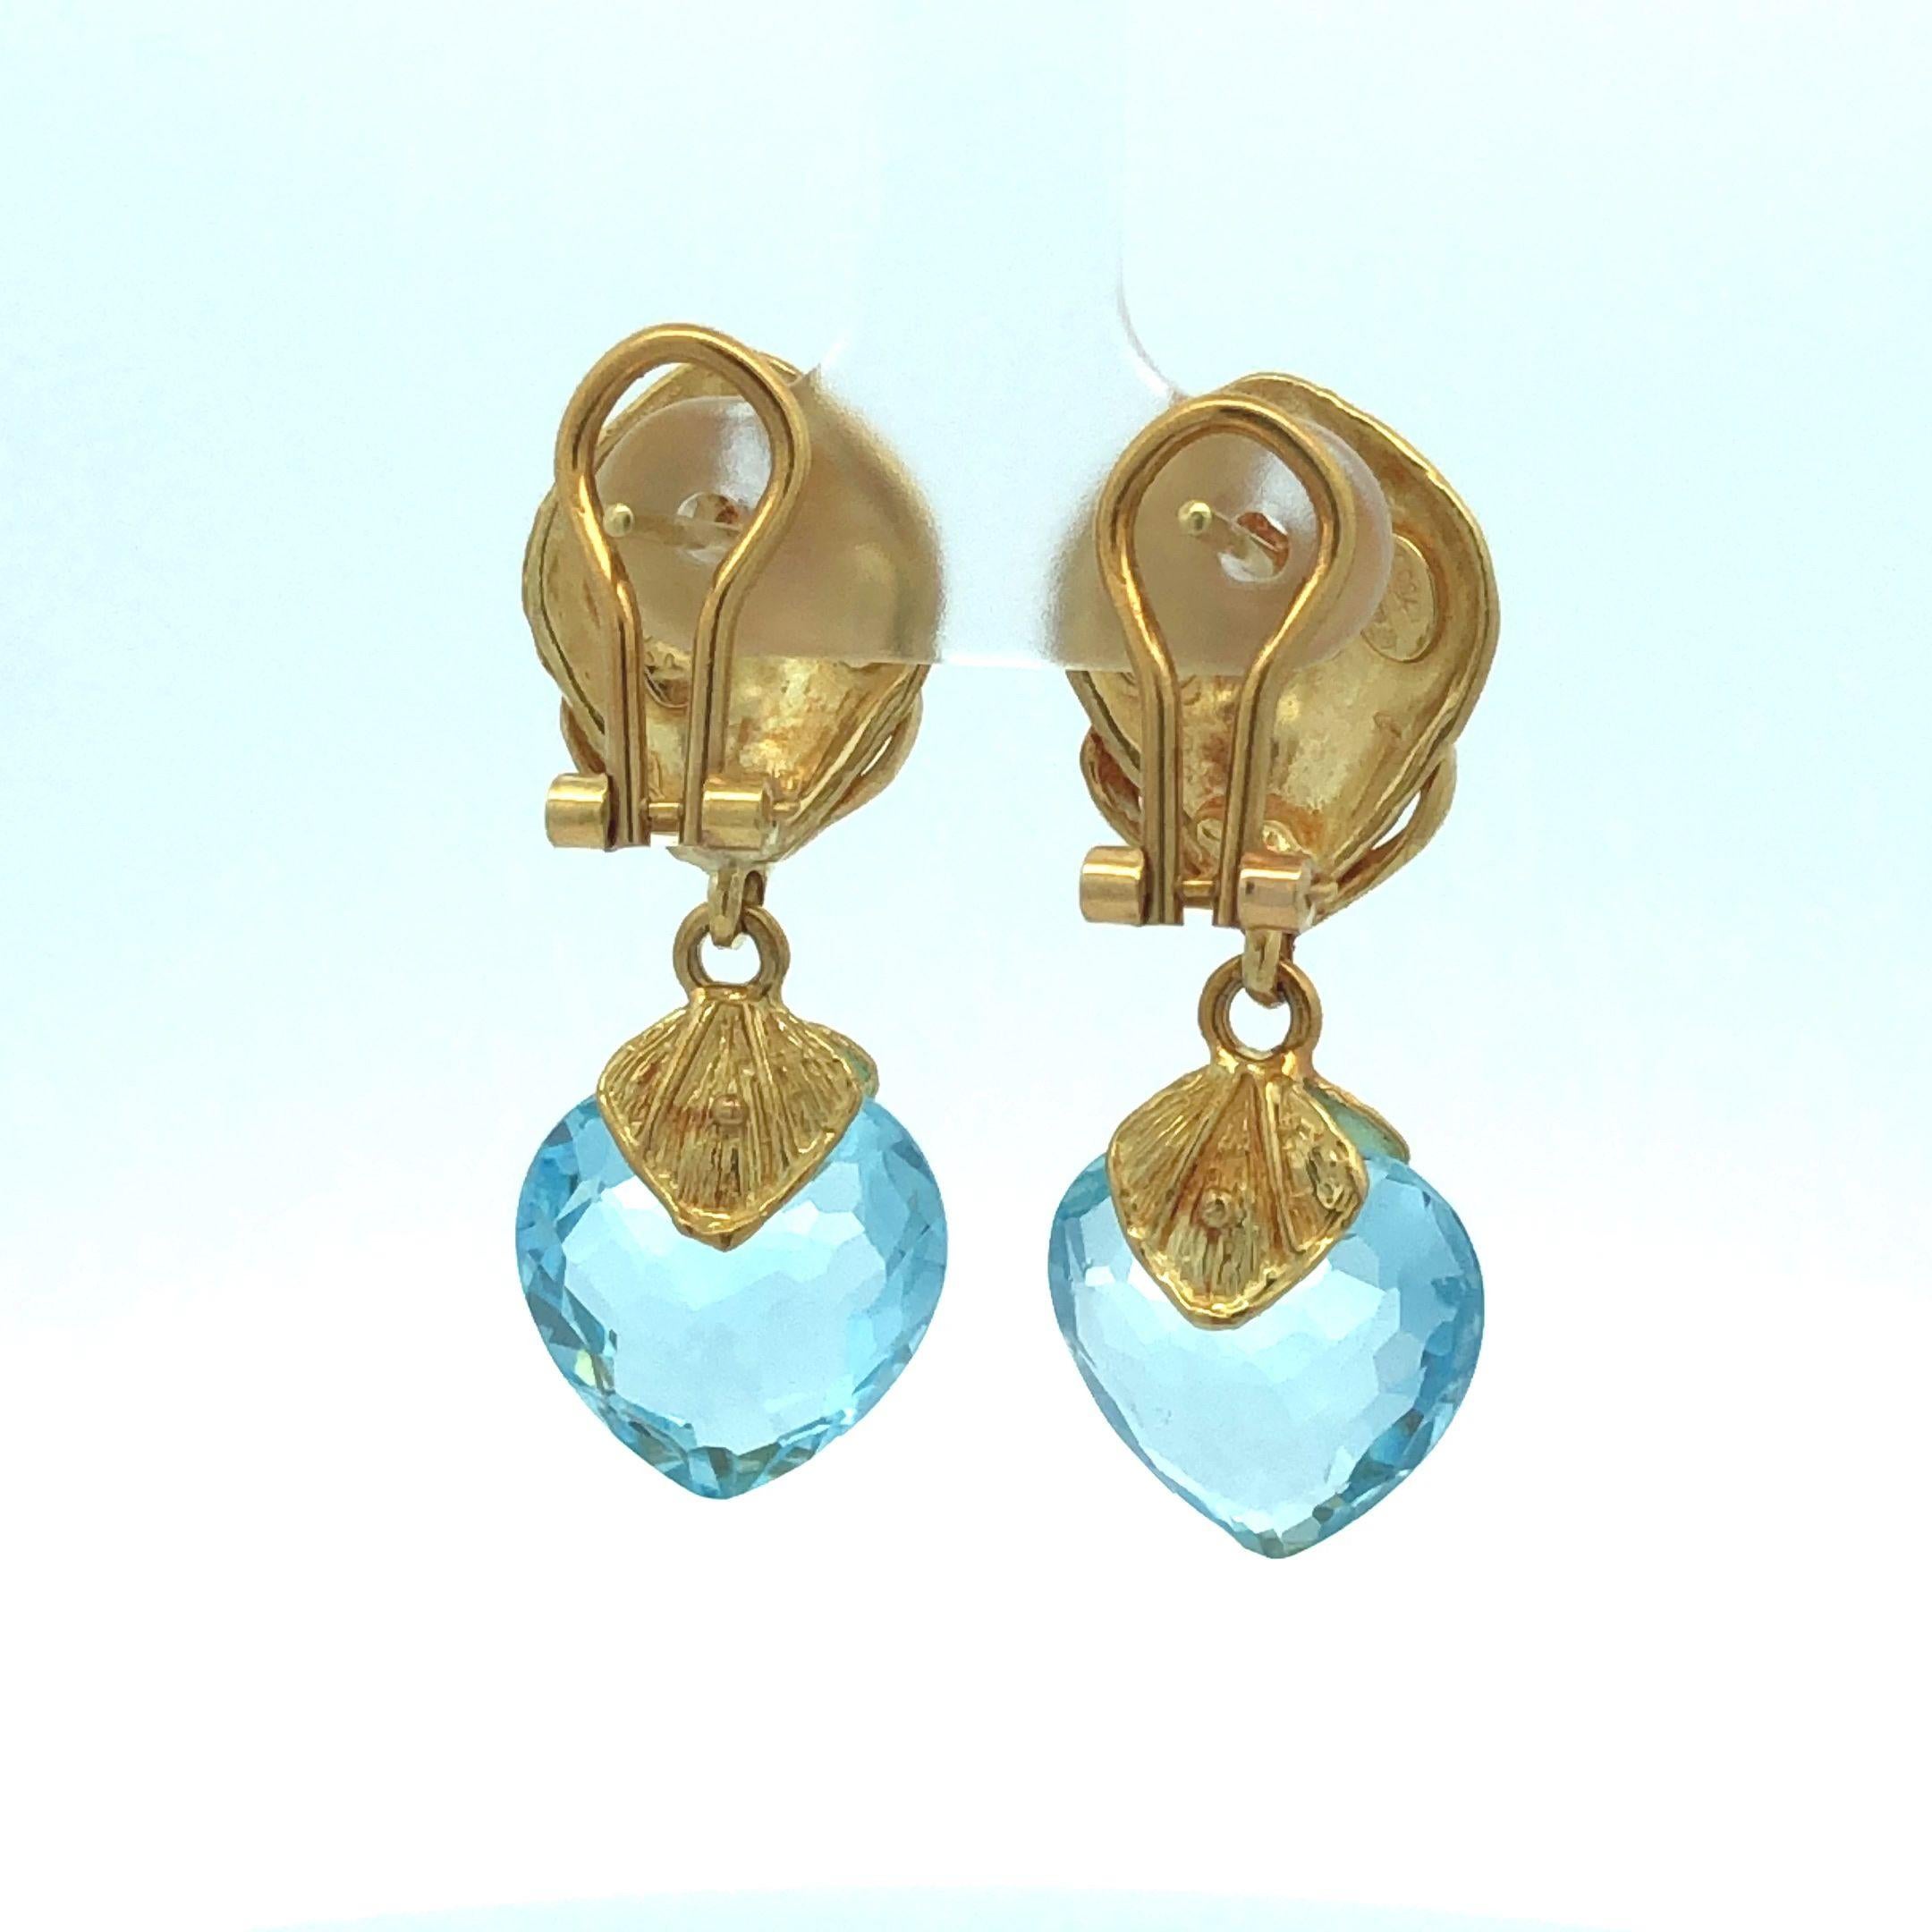 These earrings embody timeless elegance, exhibiting the exquisite brilliance of the blue topaz and the captivating allure of 18 karat yellow gold.

The focal point of these earrings is the heart-shaped briolette cuts of Blue Topaz, their facets